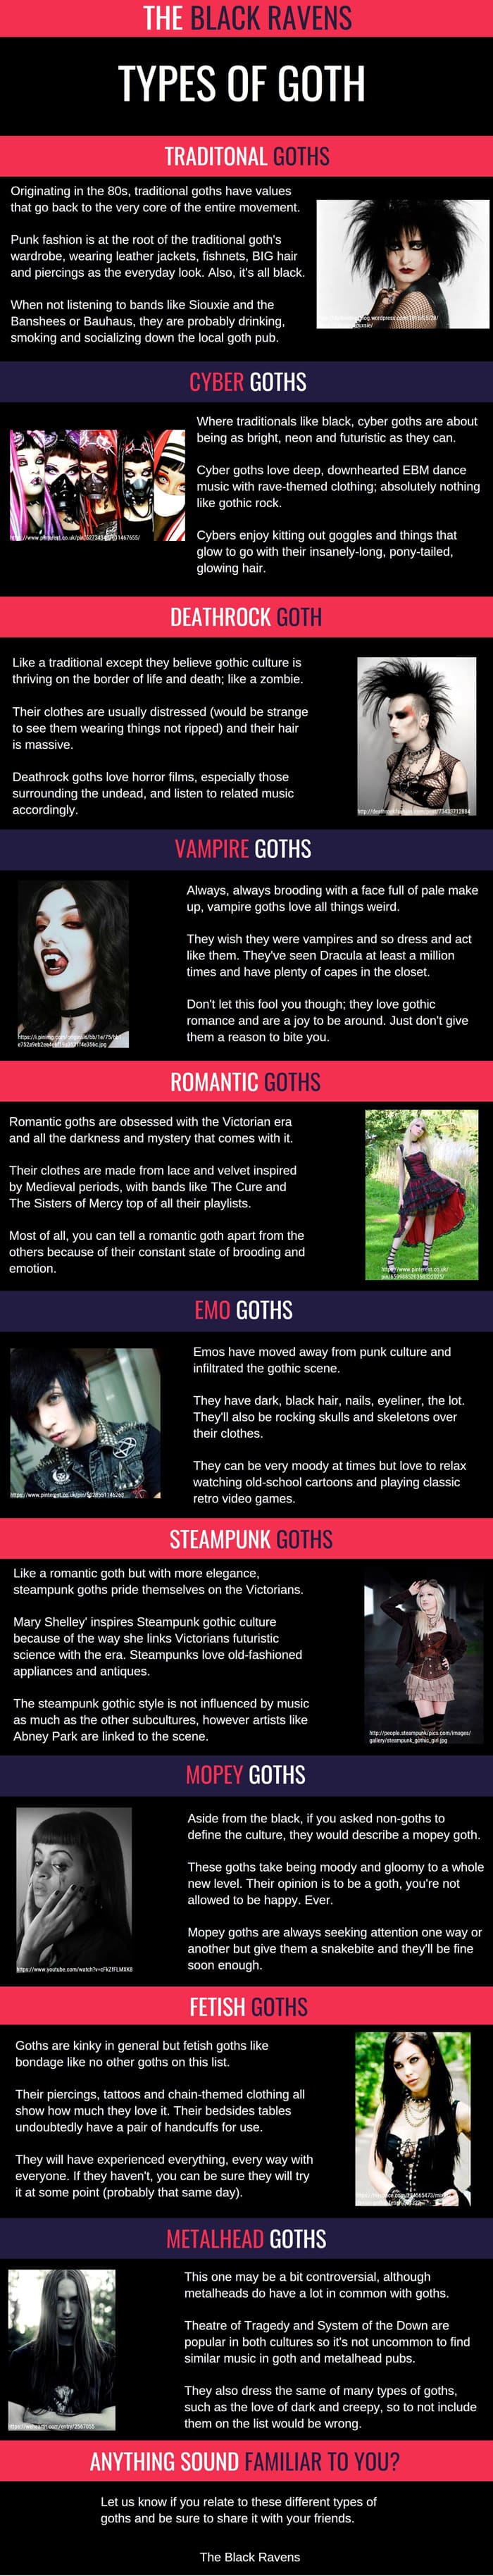 Types of Goth Infographic